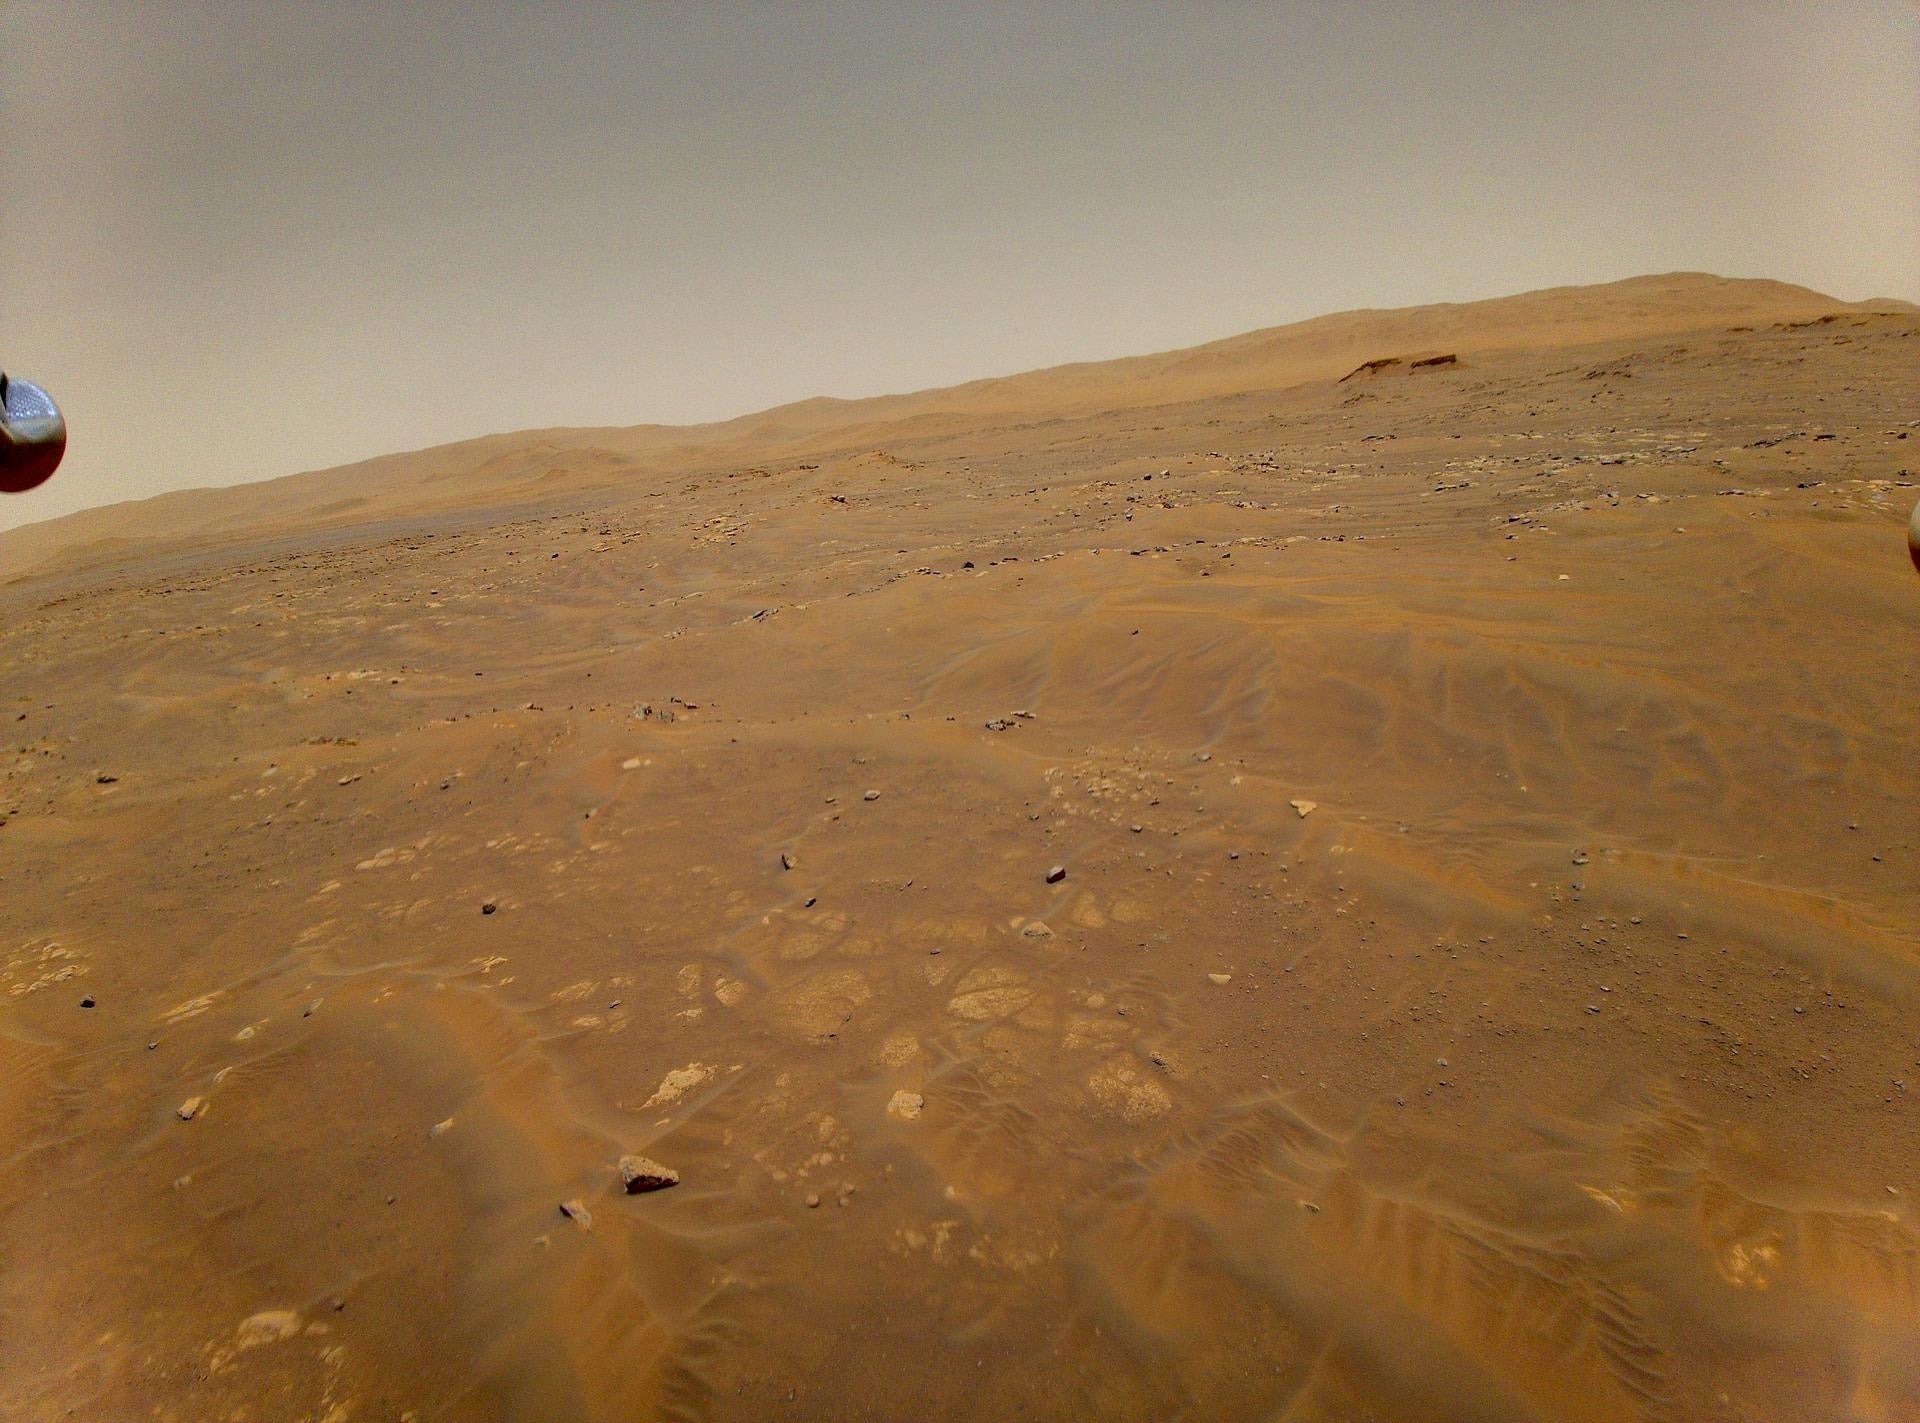 This image of Mars was taken from the height of 33 feet (10 meters) by NASA's Ingenuity Mars helicopter during its sixth flight, on May 22, 2021. Credit: NASA